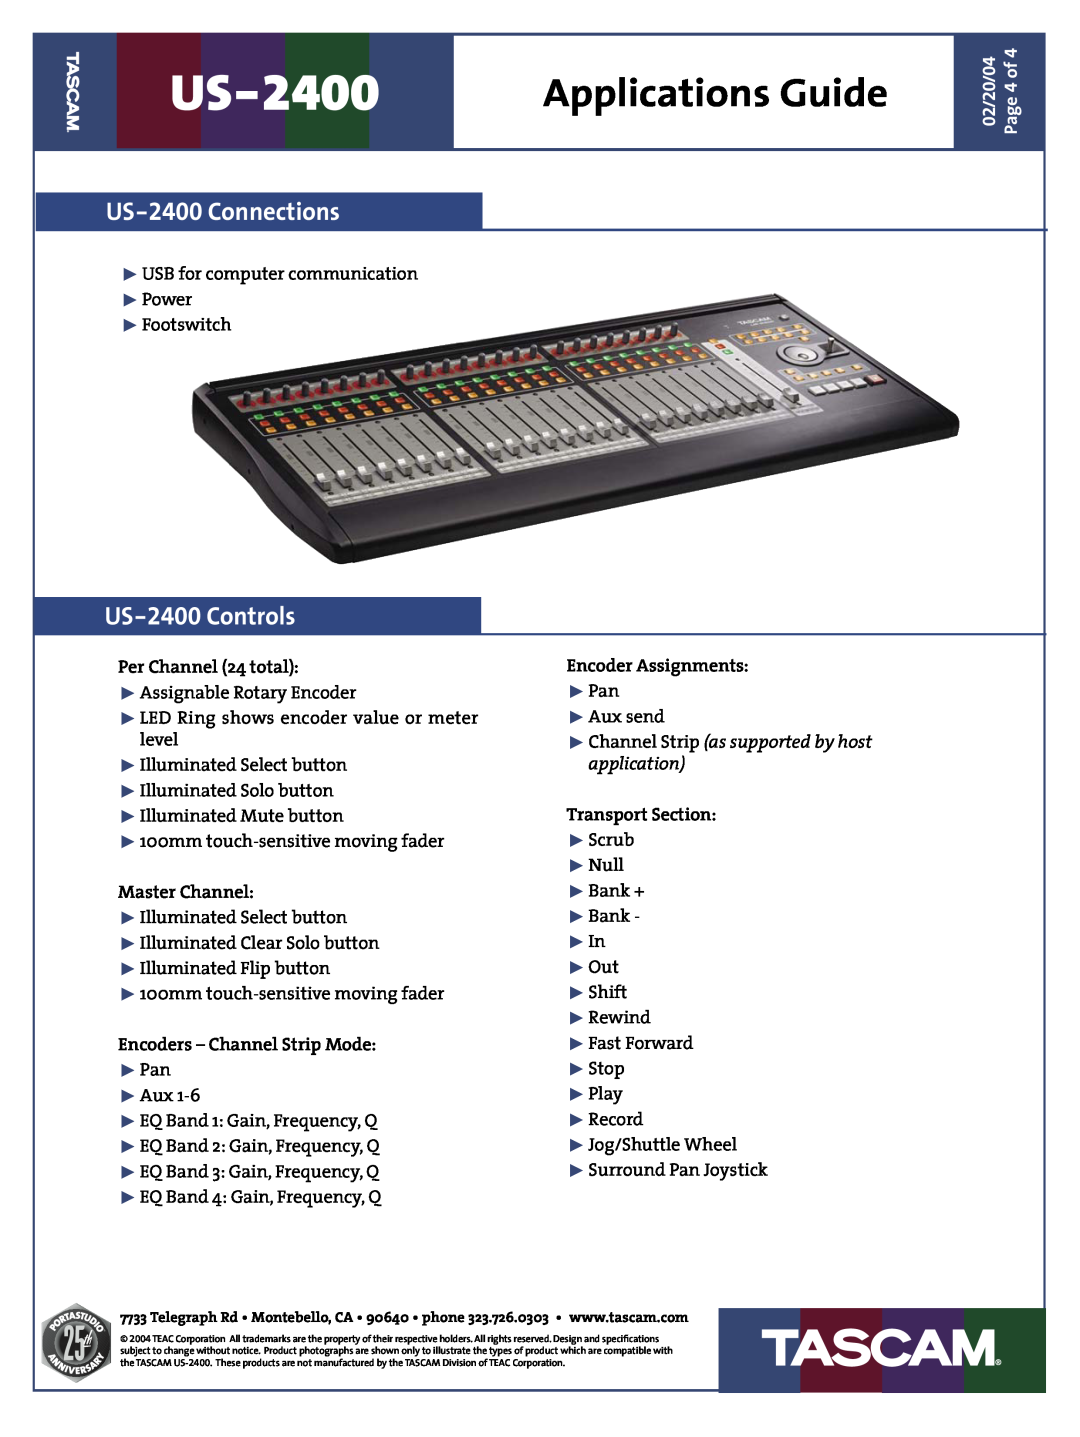 Tascam manual US-2400 Connections, US-2400 Controls, Applications Guide, Per Channel 24 total, Master Channel 